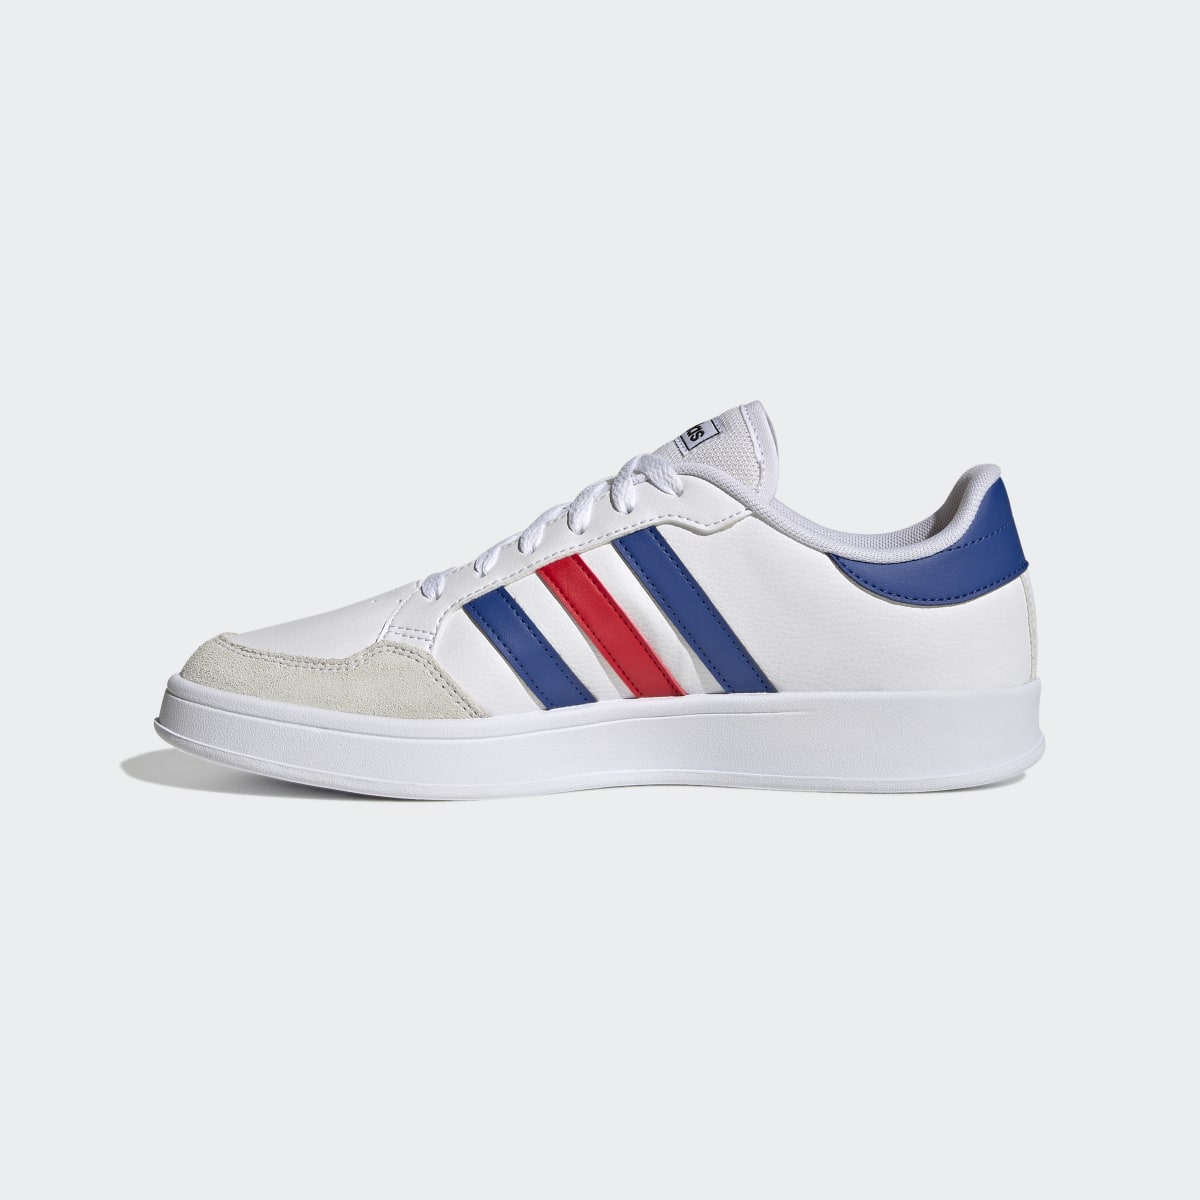 Adidas Breaknet Court Lifestyle Shoes. 7